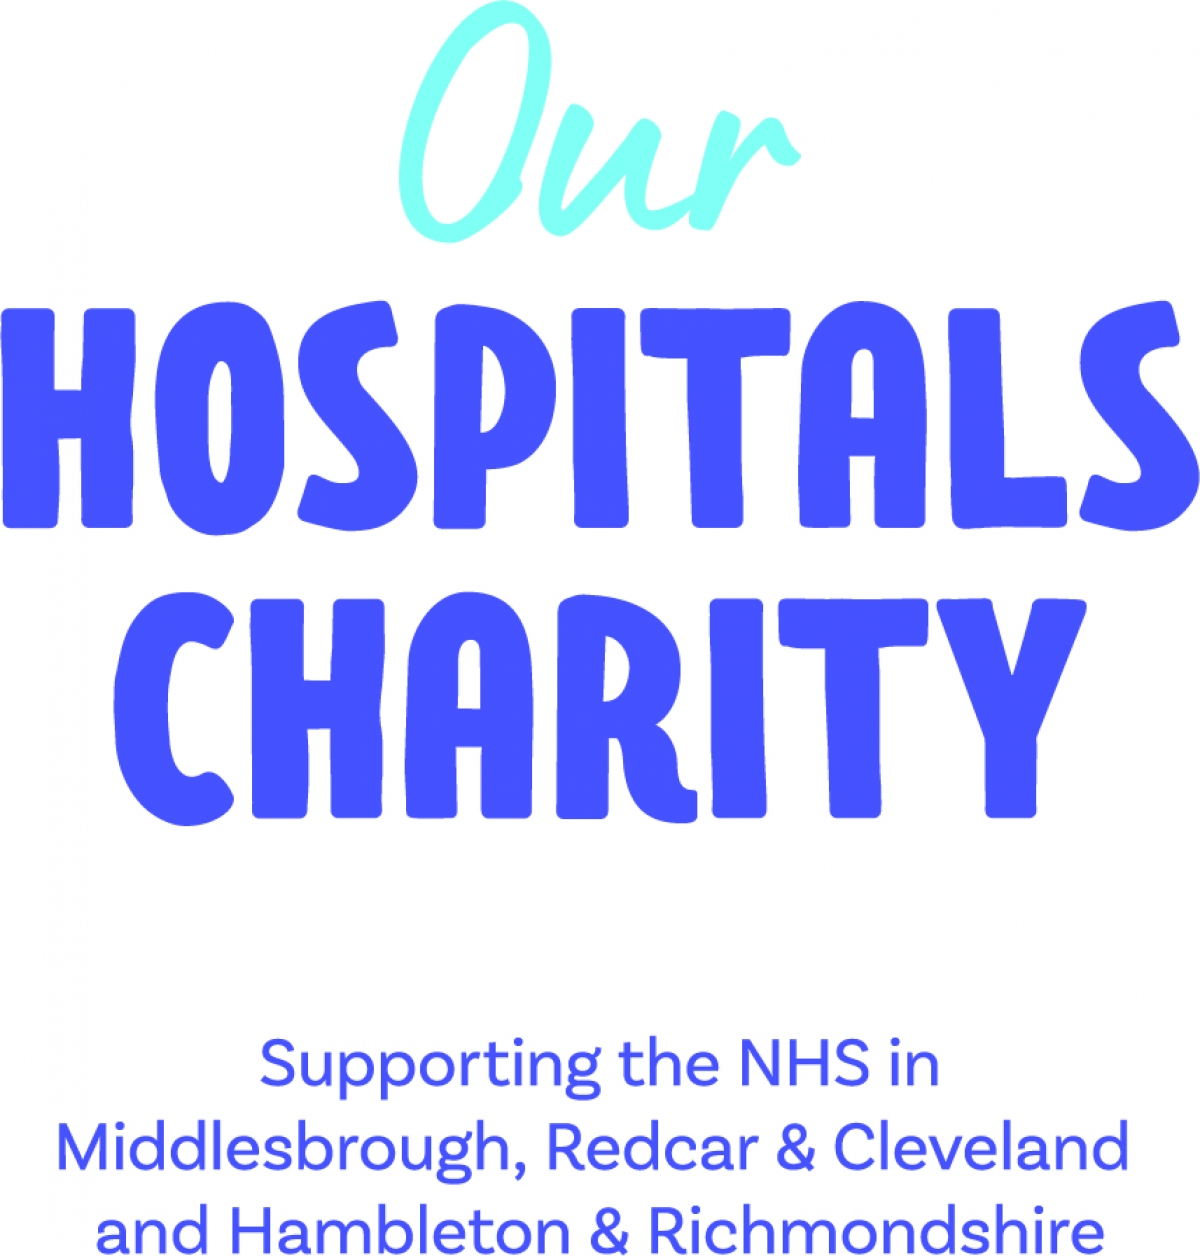 Our Hospitals Charity eCards